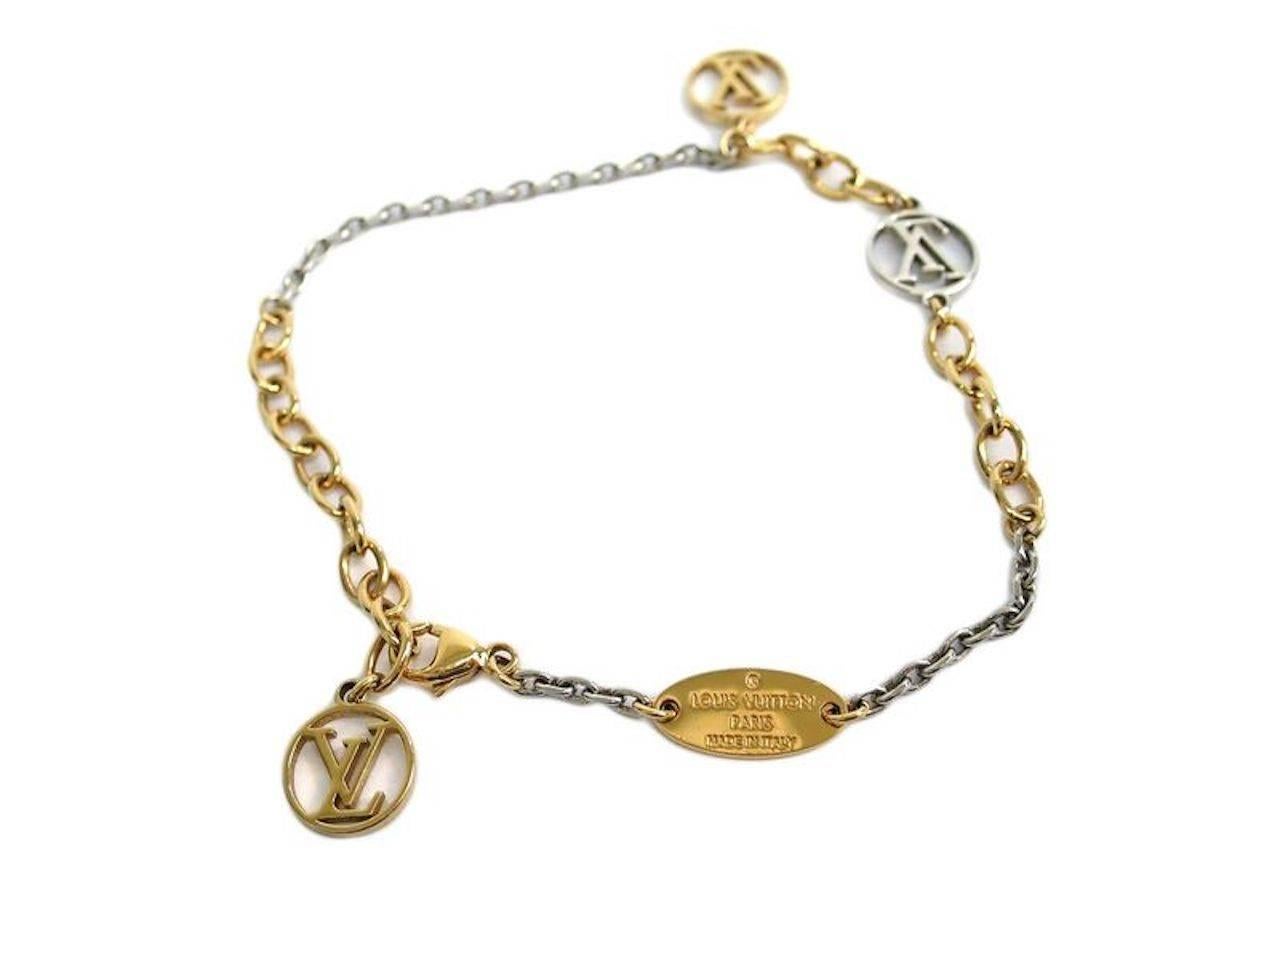 CURATOR'S NOTES

Louis Vuitton Mixed Metal LV Logo Chain Link Charm Bracelet in Box  

Metal
Gold tone
Silver tone
Lobster claw closure
Made in Italy
Charms measure 0.5"
Adjusts to fit wrist size ~6-7.5"
Includes original Louis Vuitton